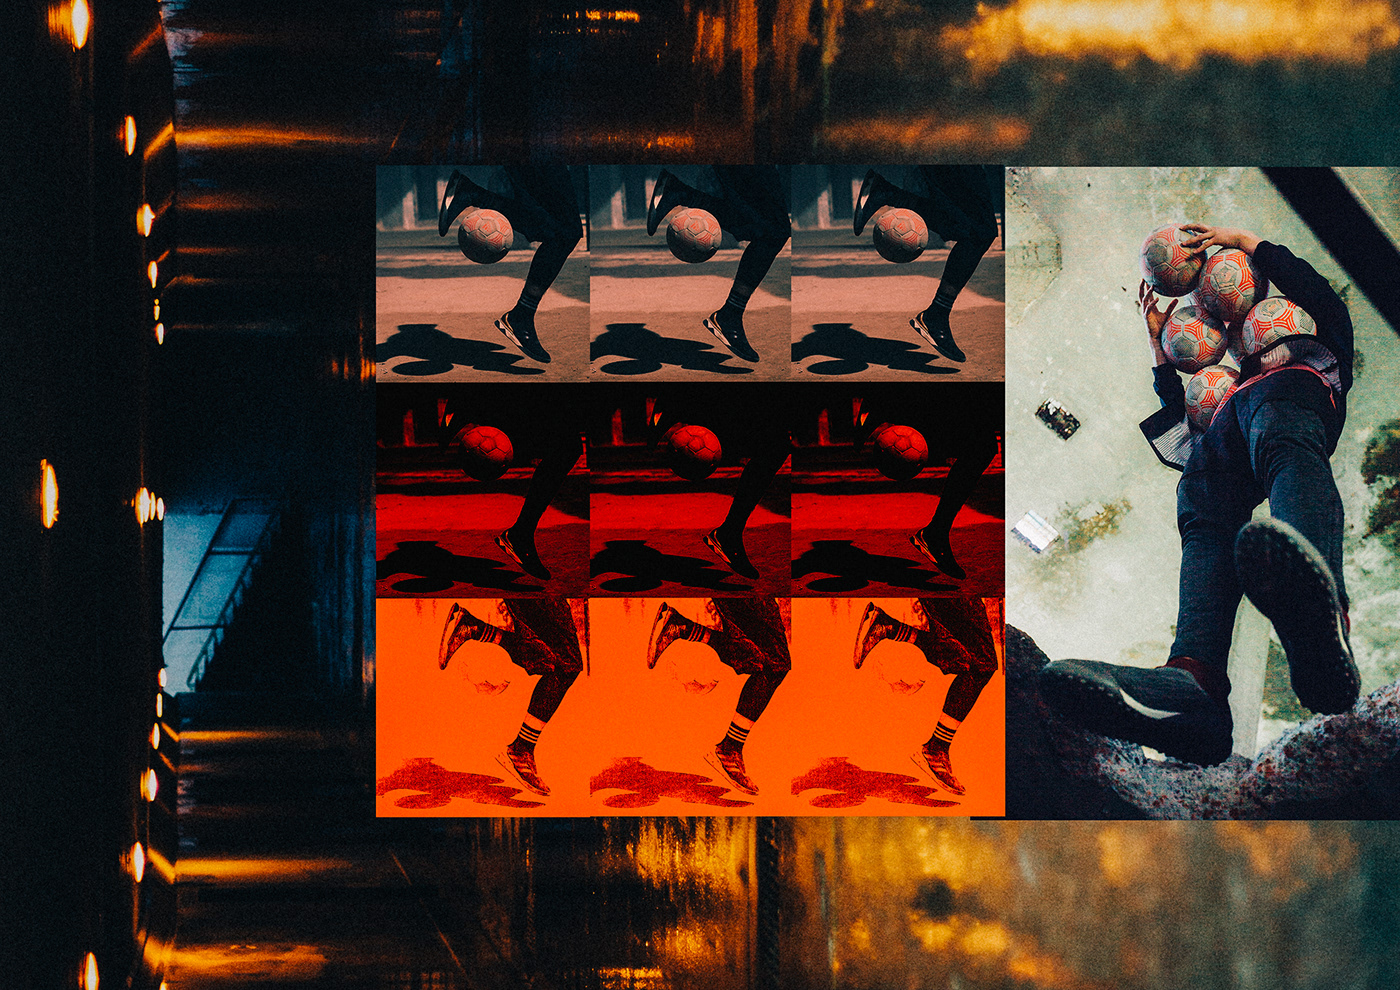 pharaoh rapper adidas football Layout collage glitche soccer campaign sport